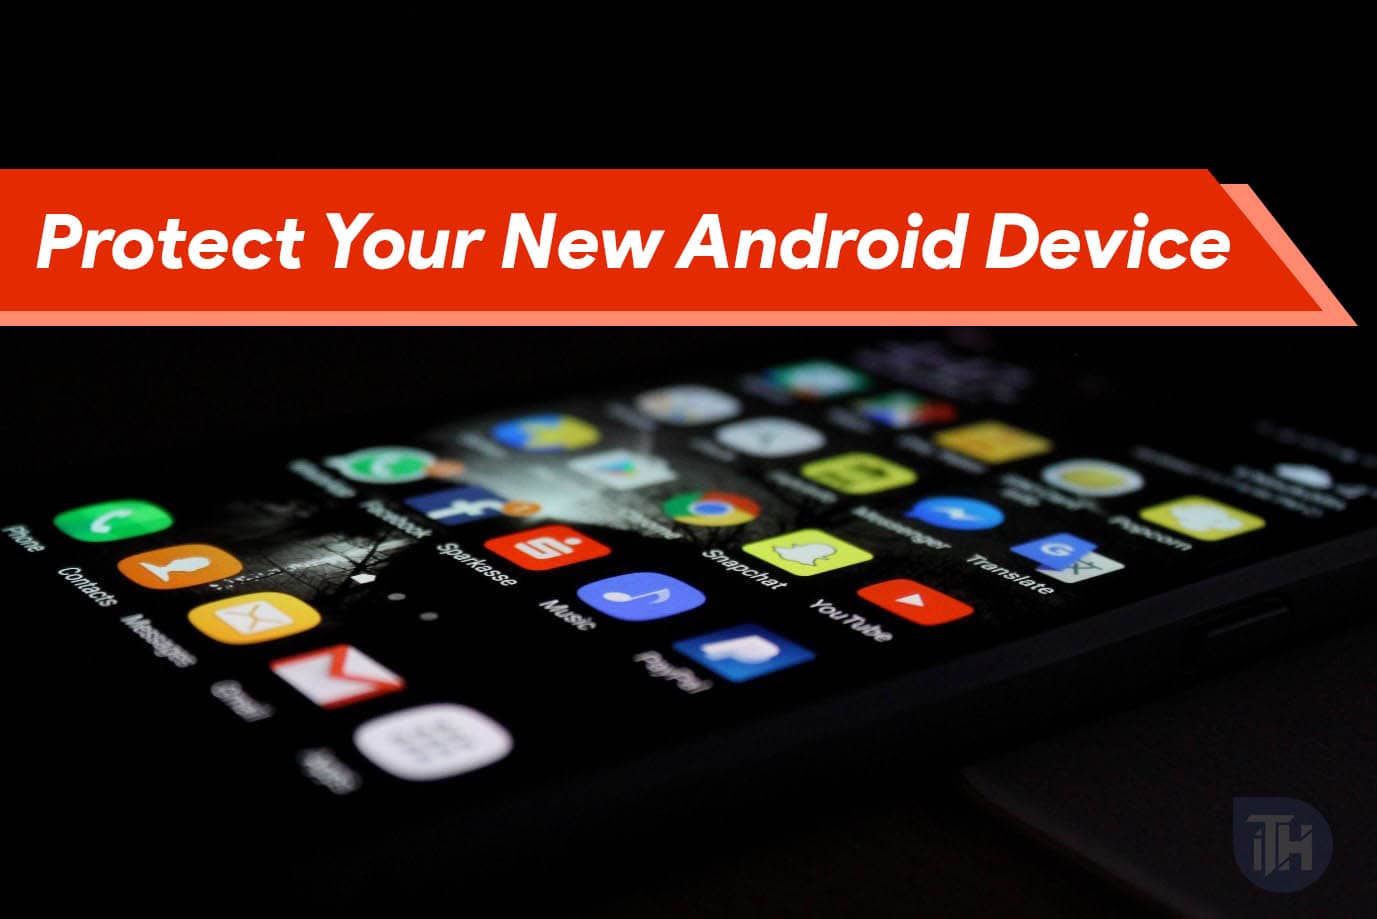 How to Protect Your New Android Device